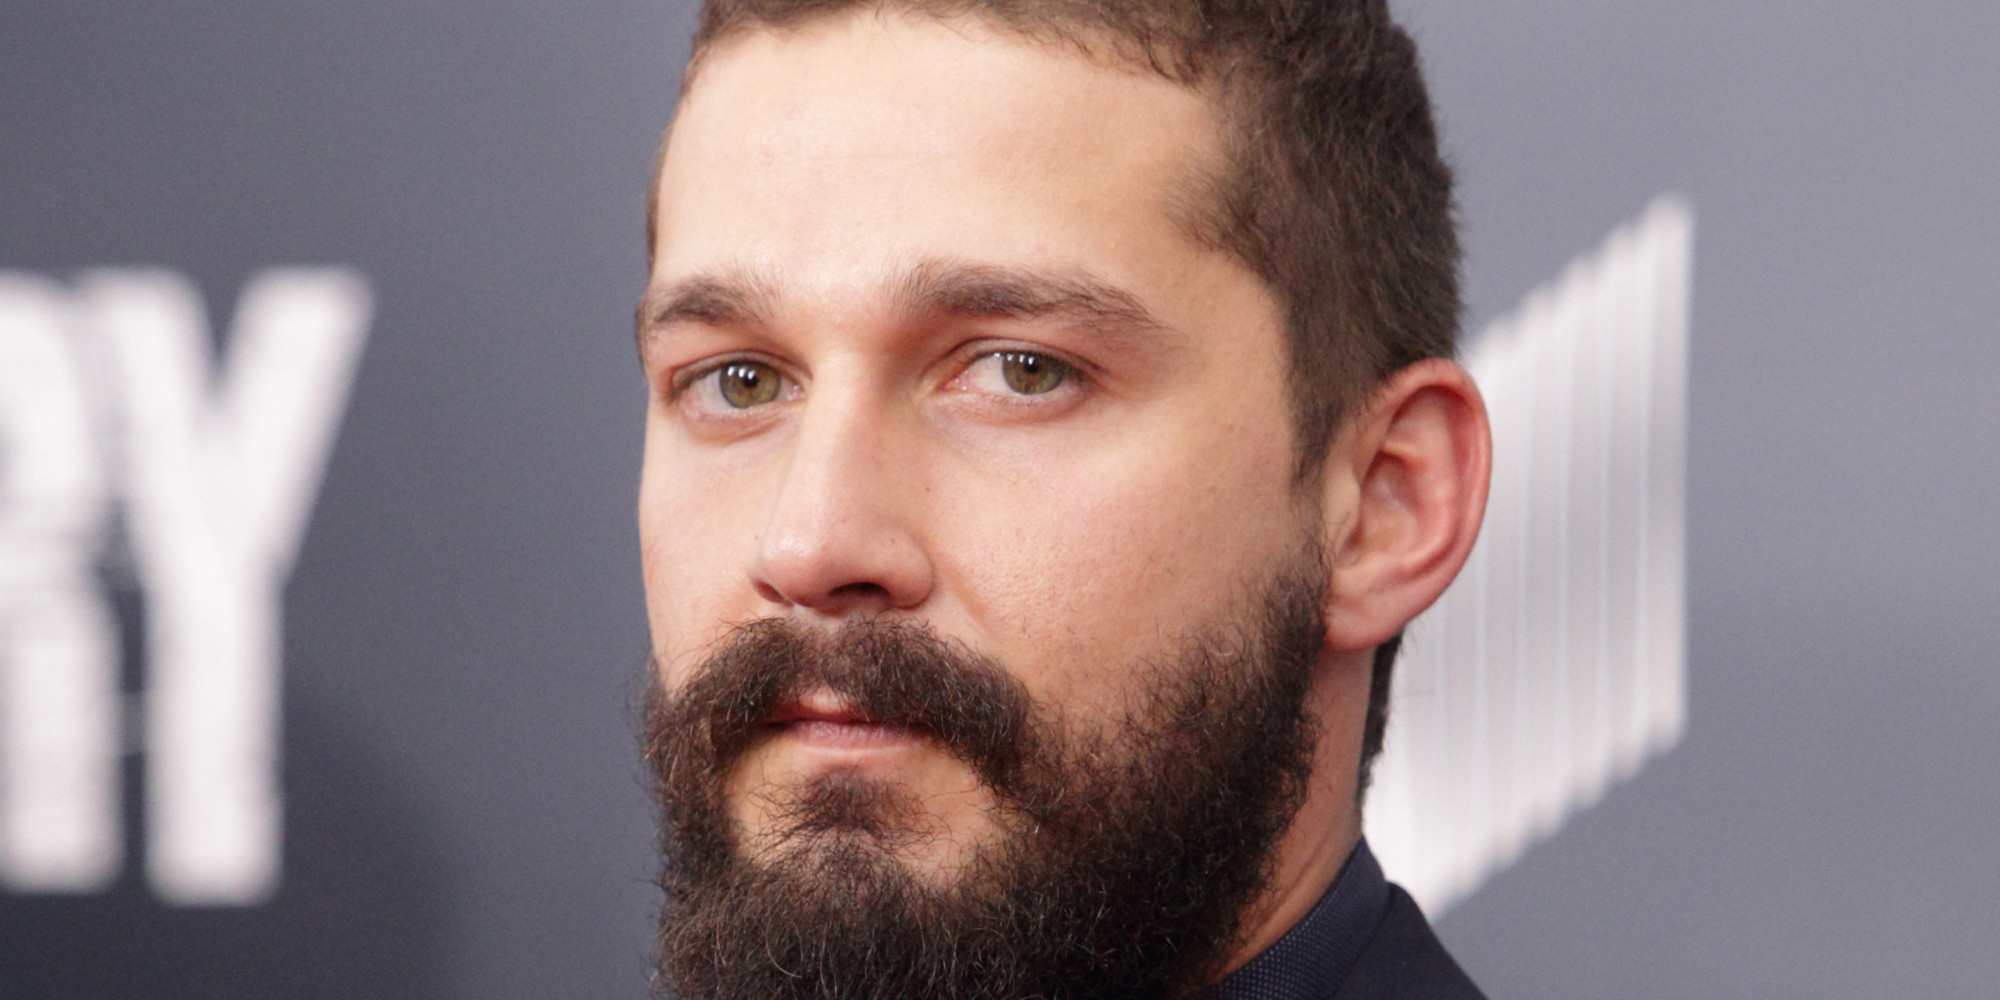 Shia Labeouf Backgrounds, Compatible - PC, Mobile, Gadgets| 2000x1000 px